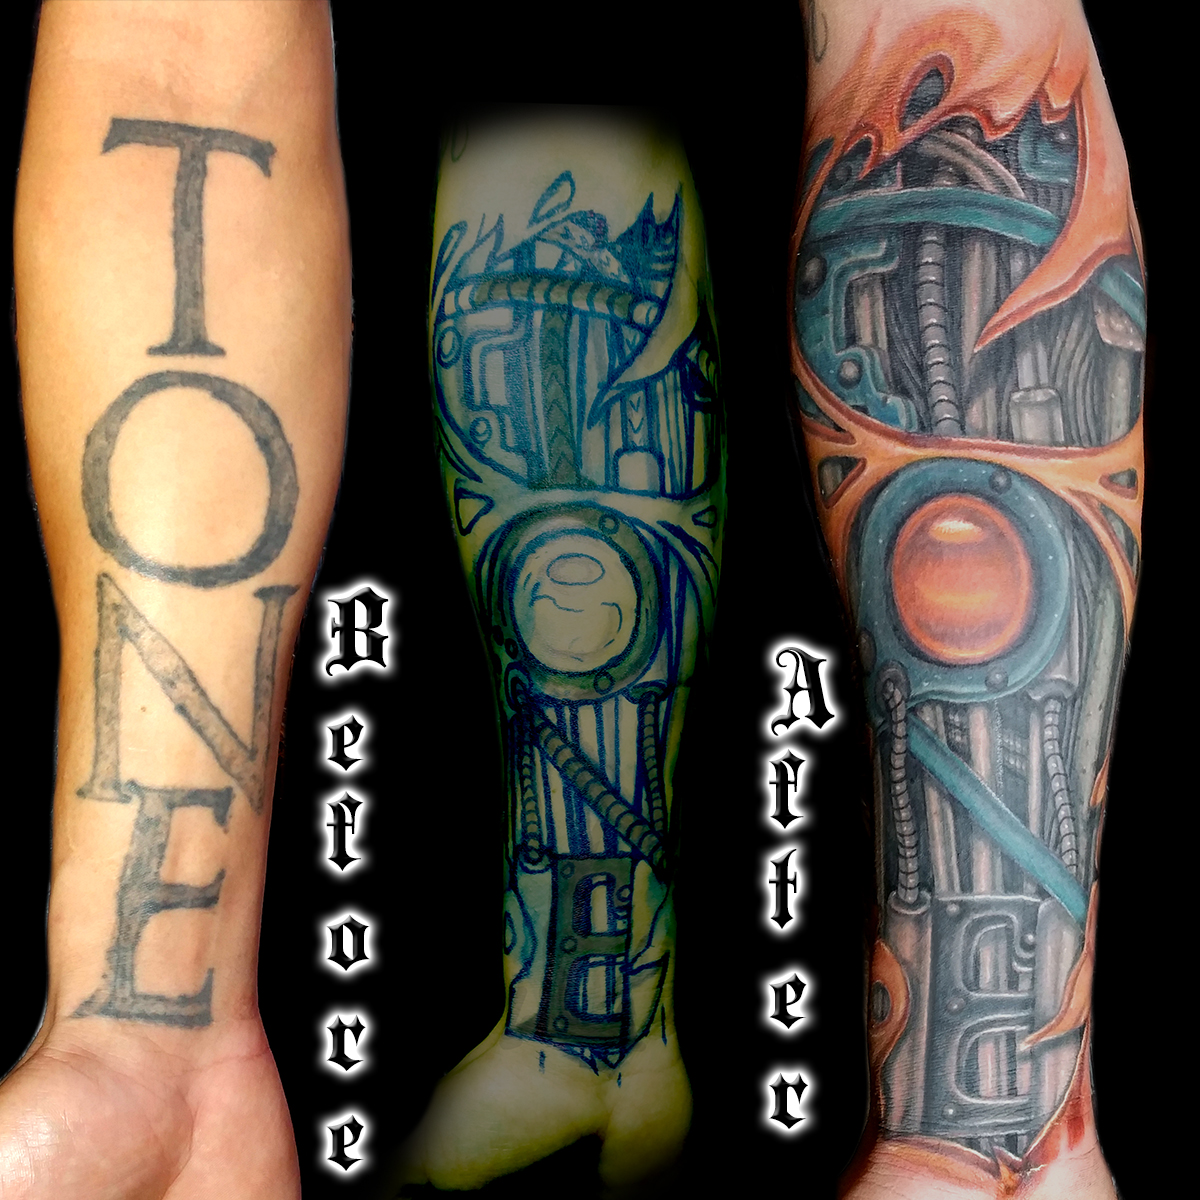 60 Unforgettable Biomechanical Tattoos that Creatively Combine Science and  Art - Designs, Meanings and Ideas | Biomechanical tattoo, Biomechanical  tattoo design, Robot tattoo